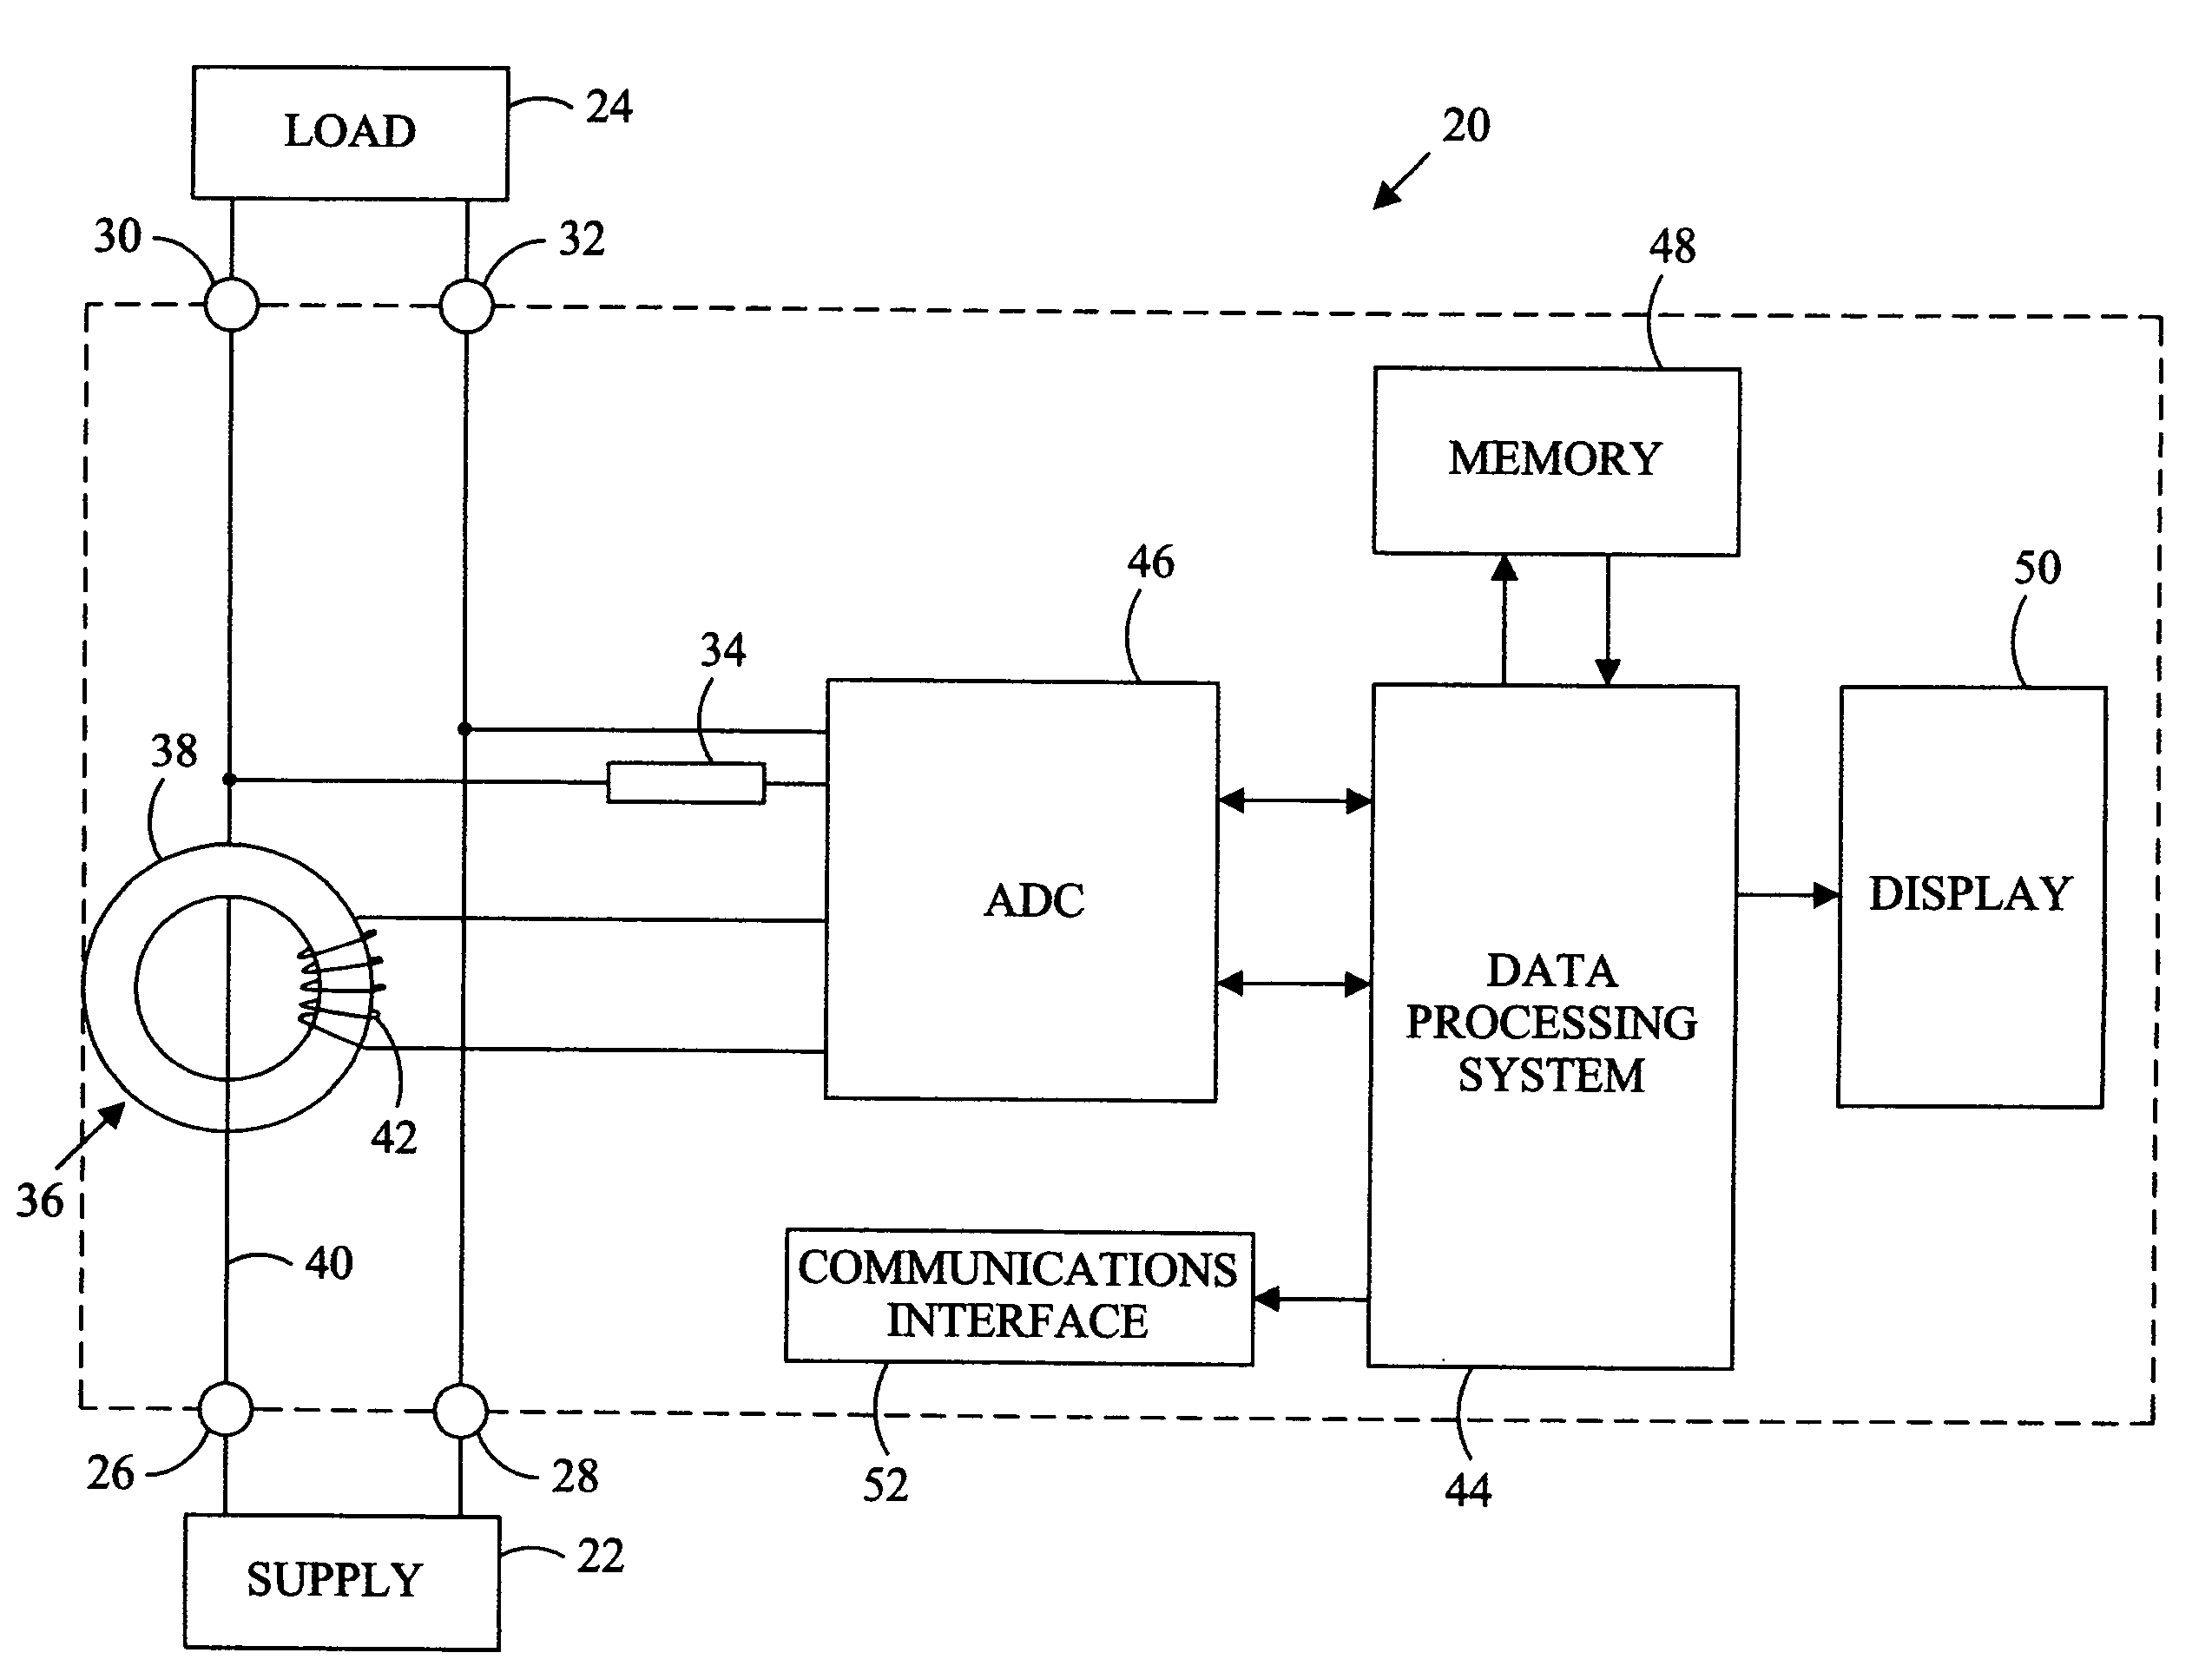 Electricity metering with a current transformer